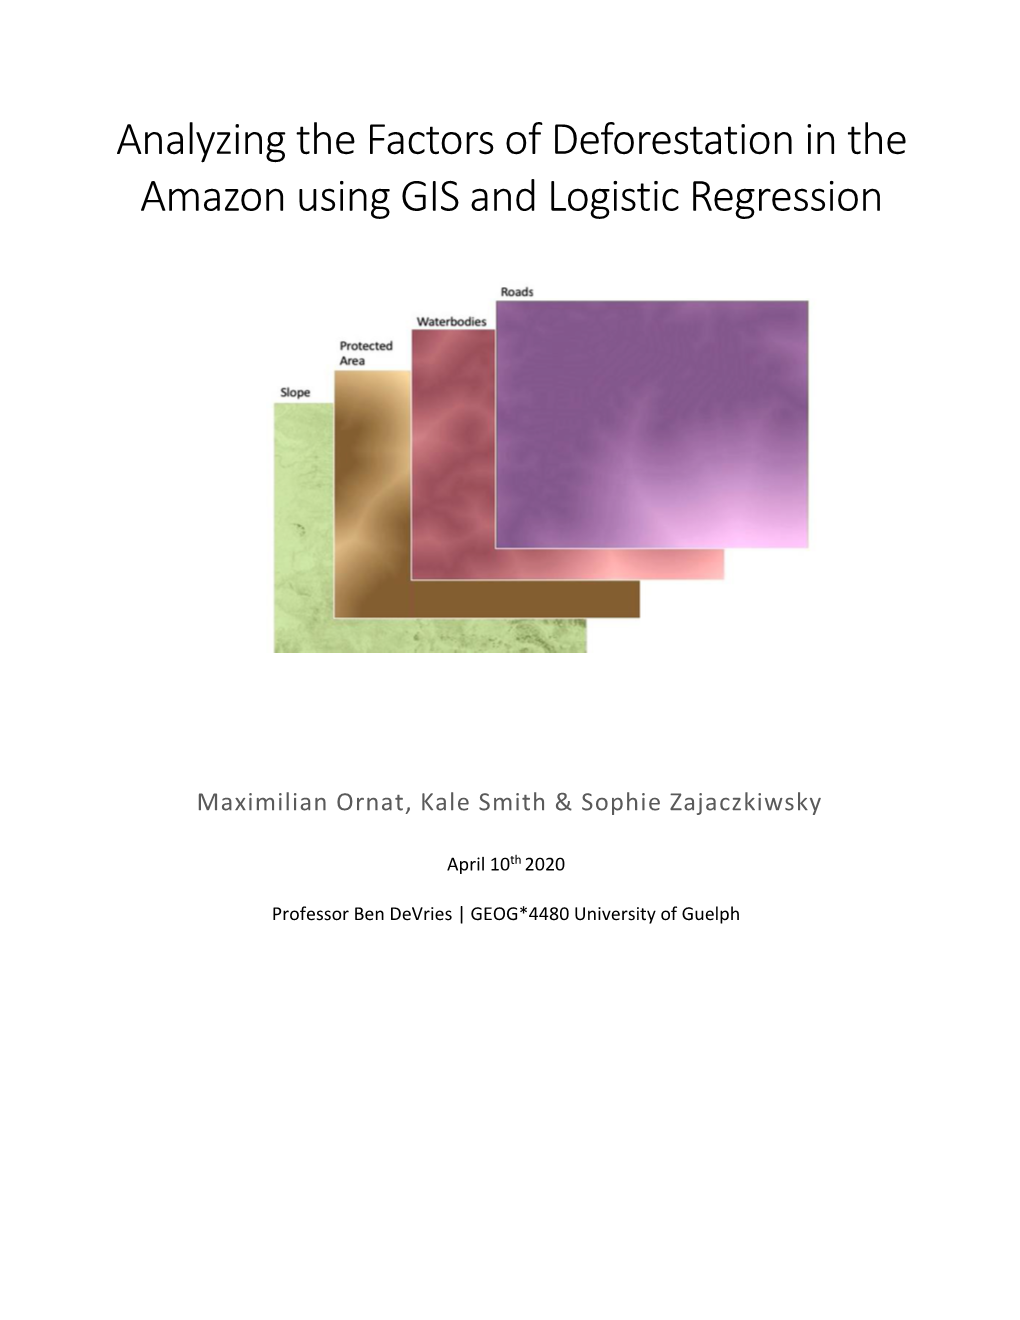 Analyzing the Factors of Deforestation in the Amazon Using GIS and Logistic Regression